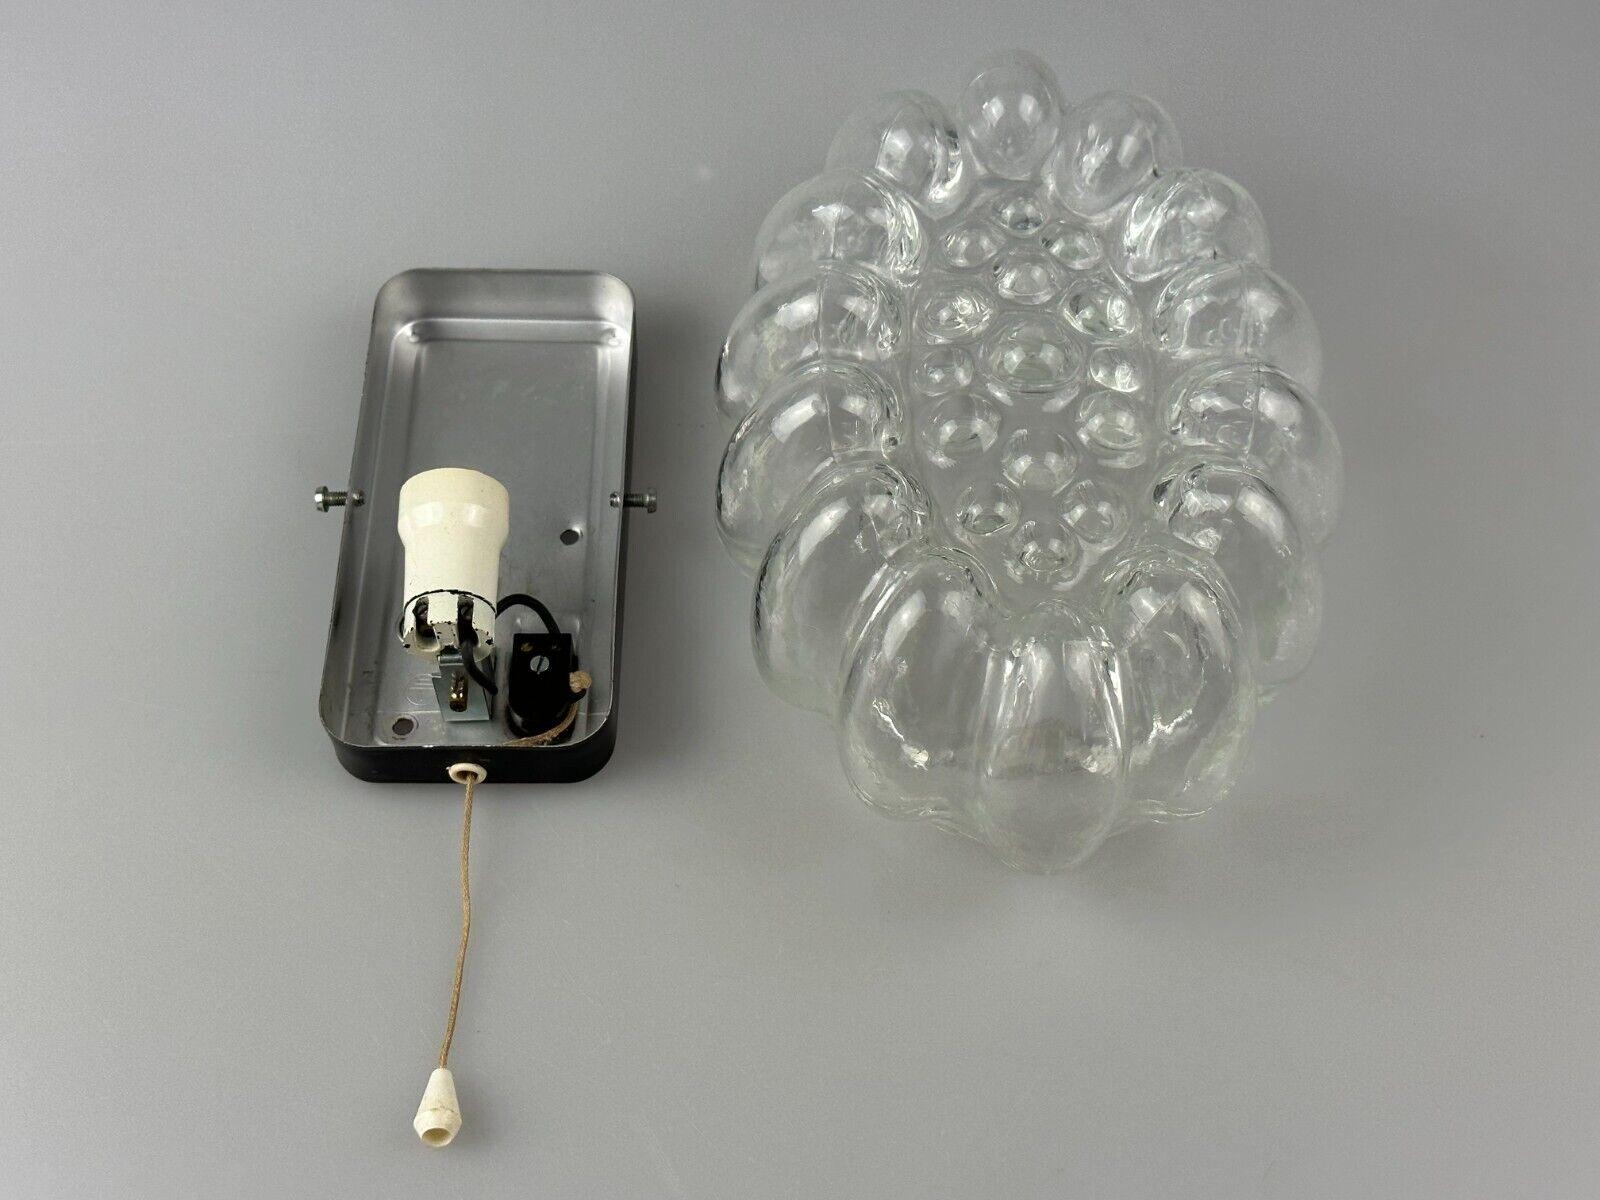 60s 70s wall lamp made of glass & metal bubble wall sconce space age design For Sale 11